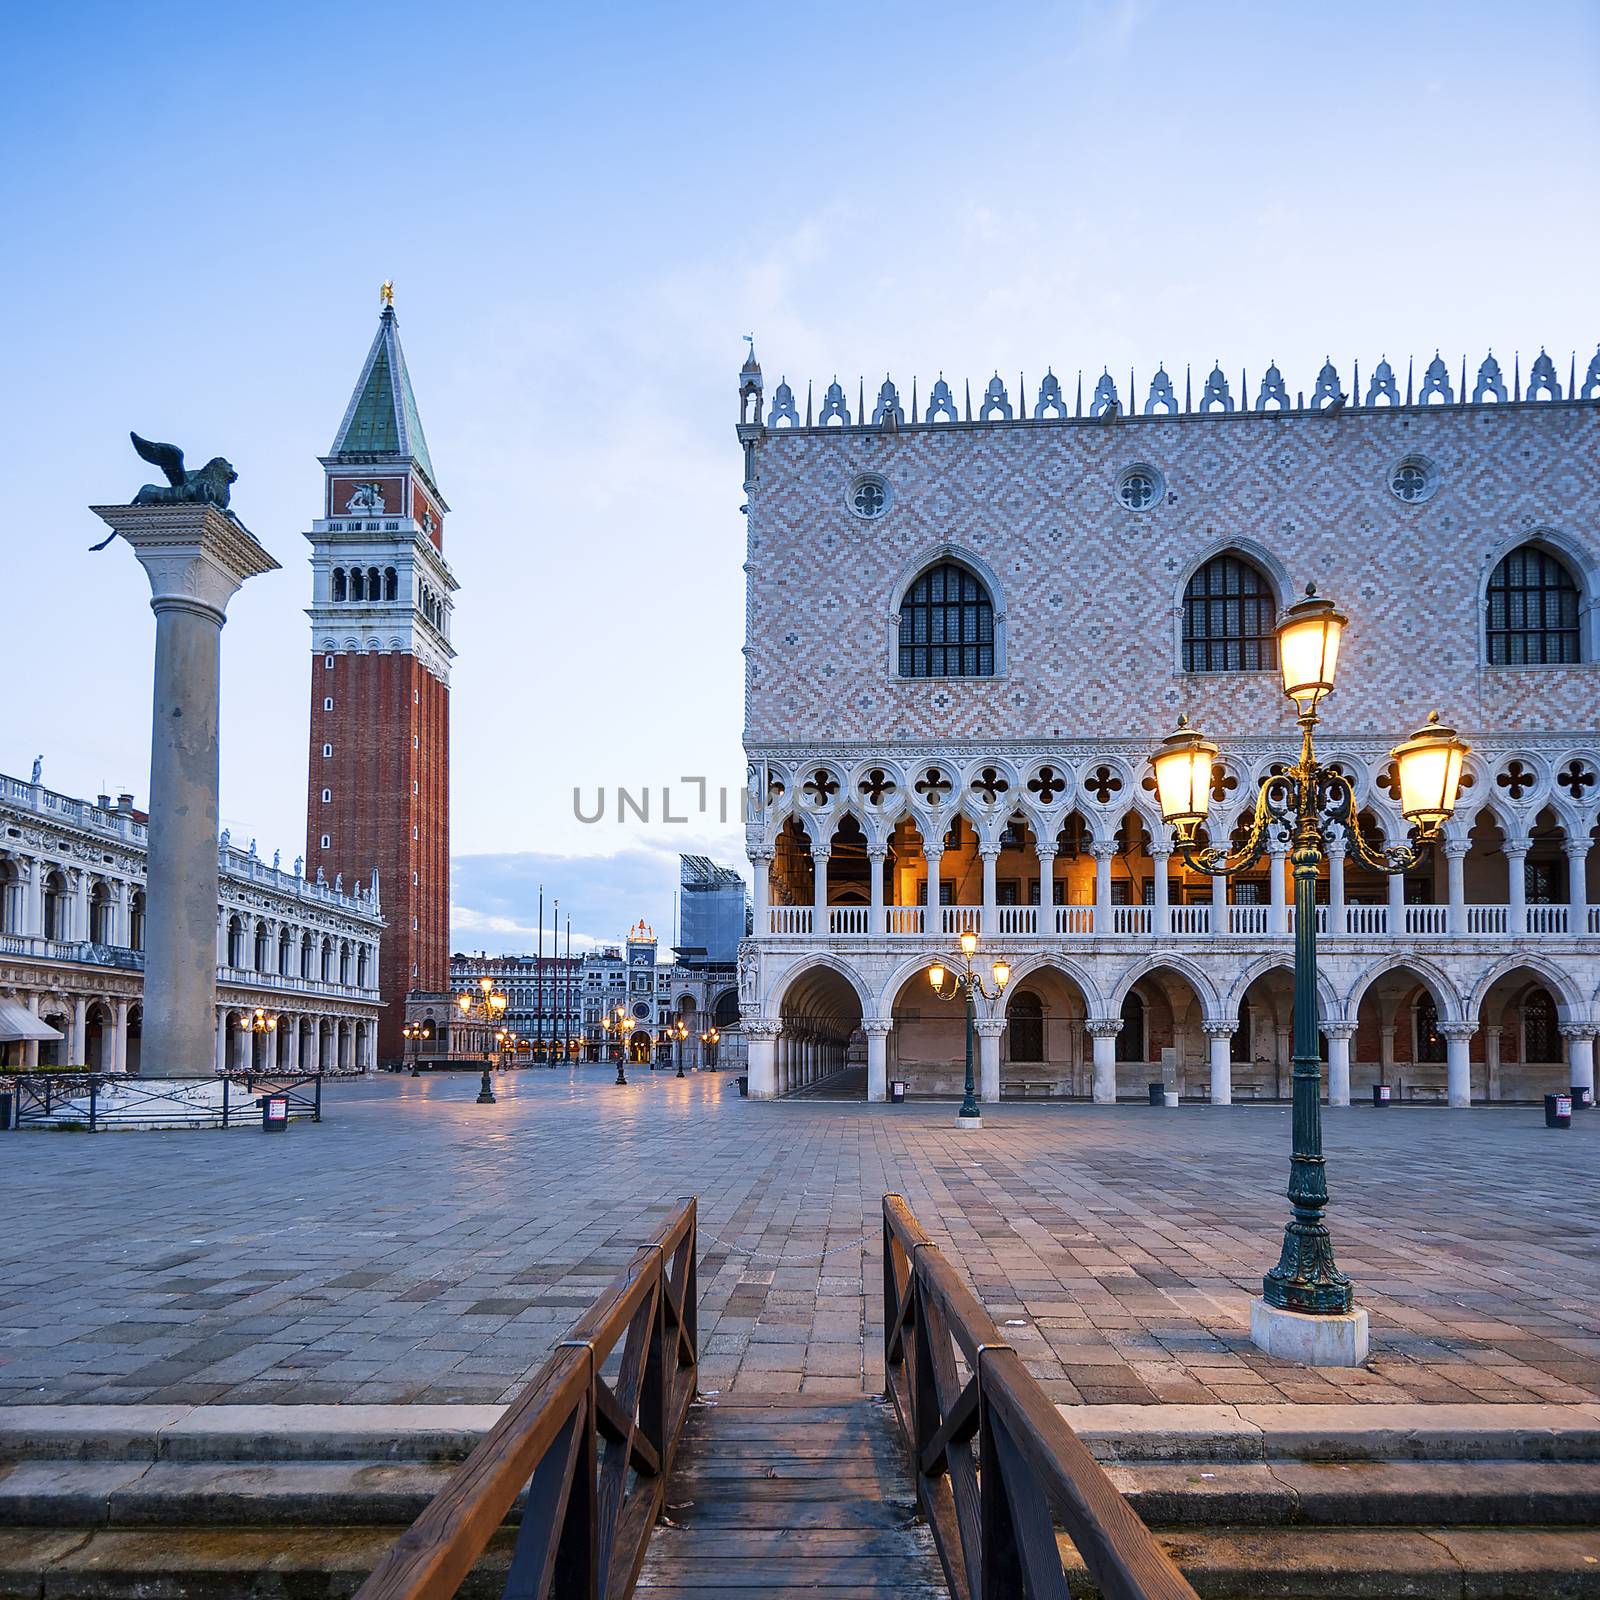 San Marco square in the morning by vwalakte